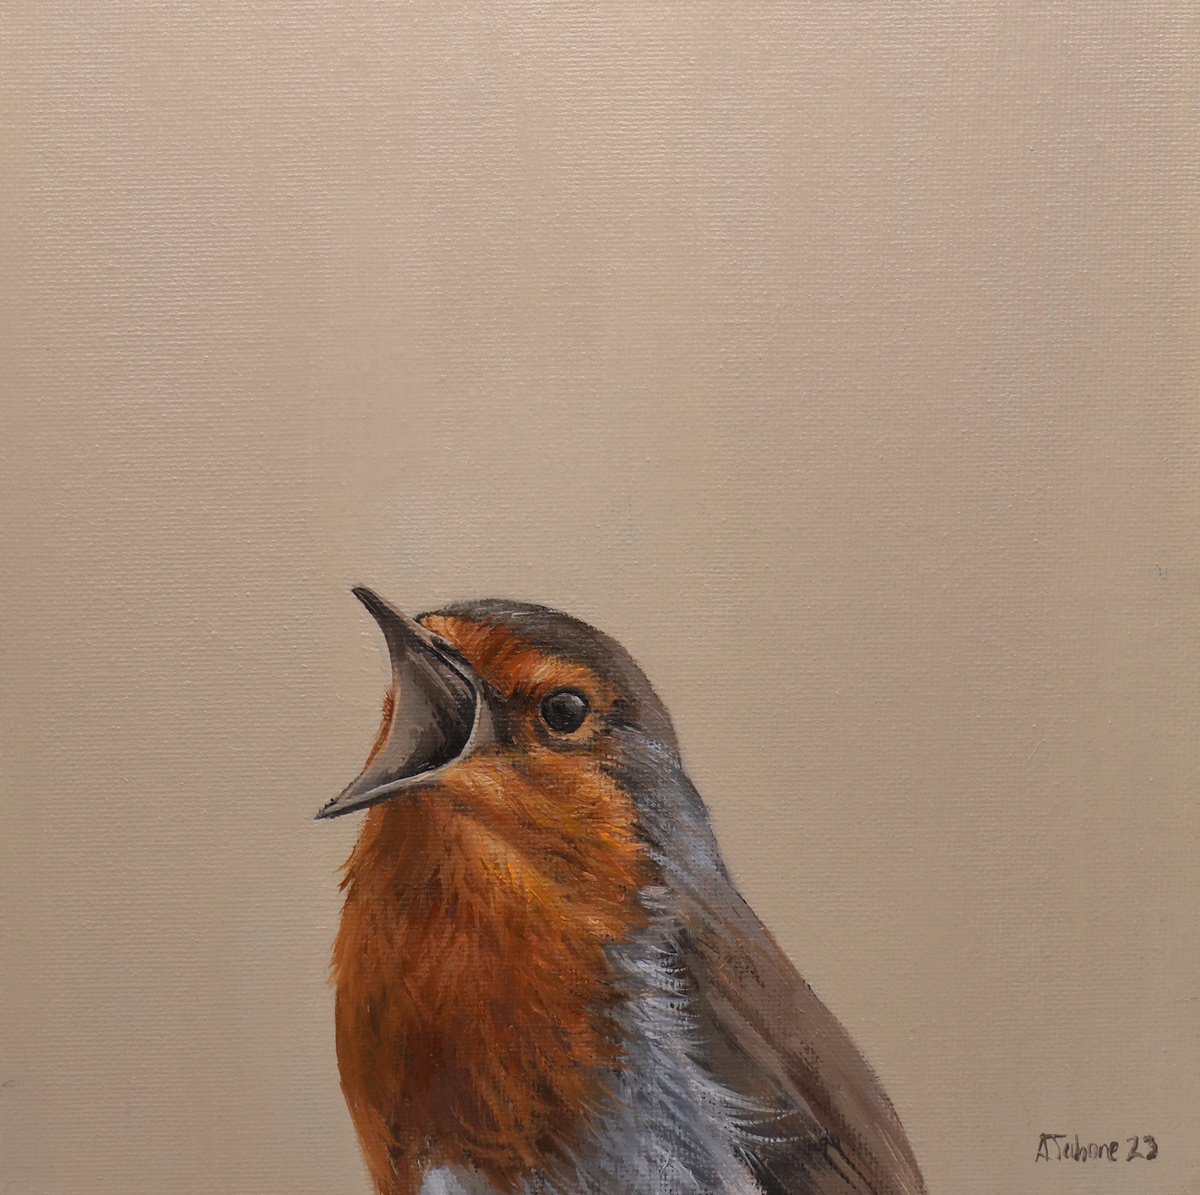 Singing Robin Red Breast at the Window by Alex Jabore